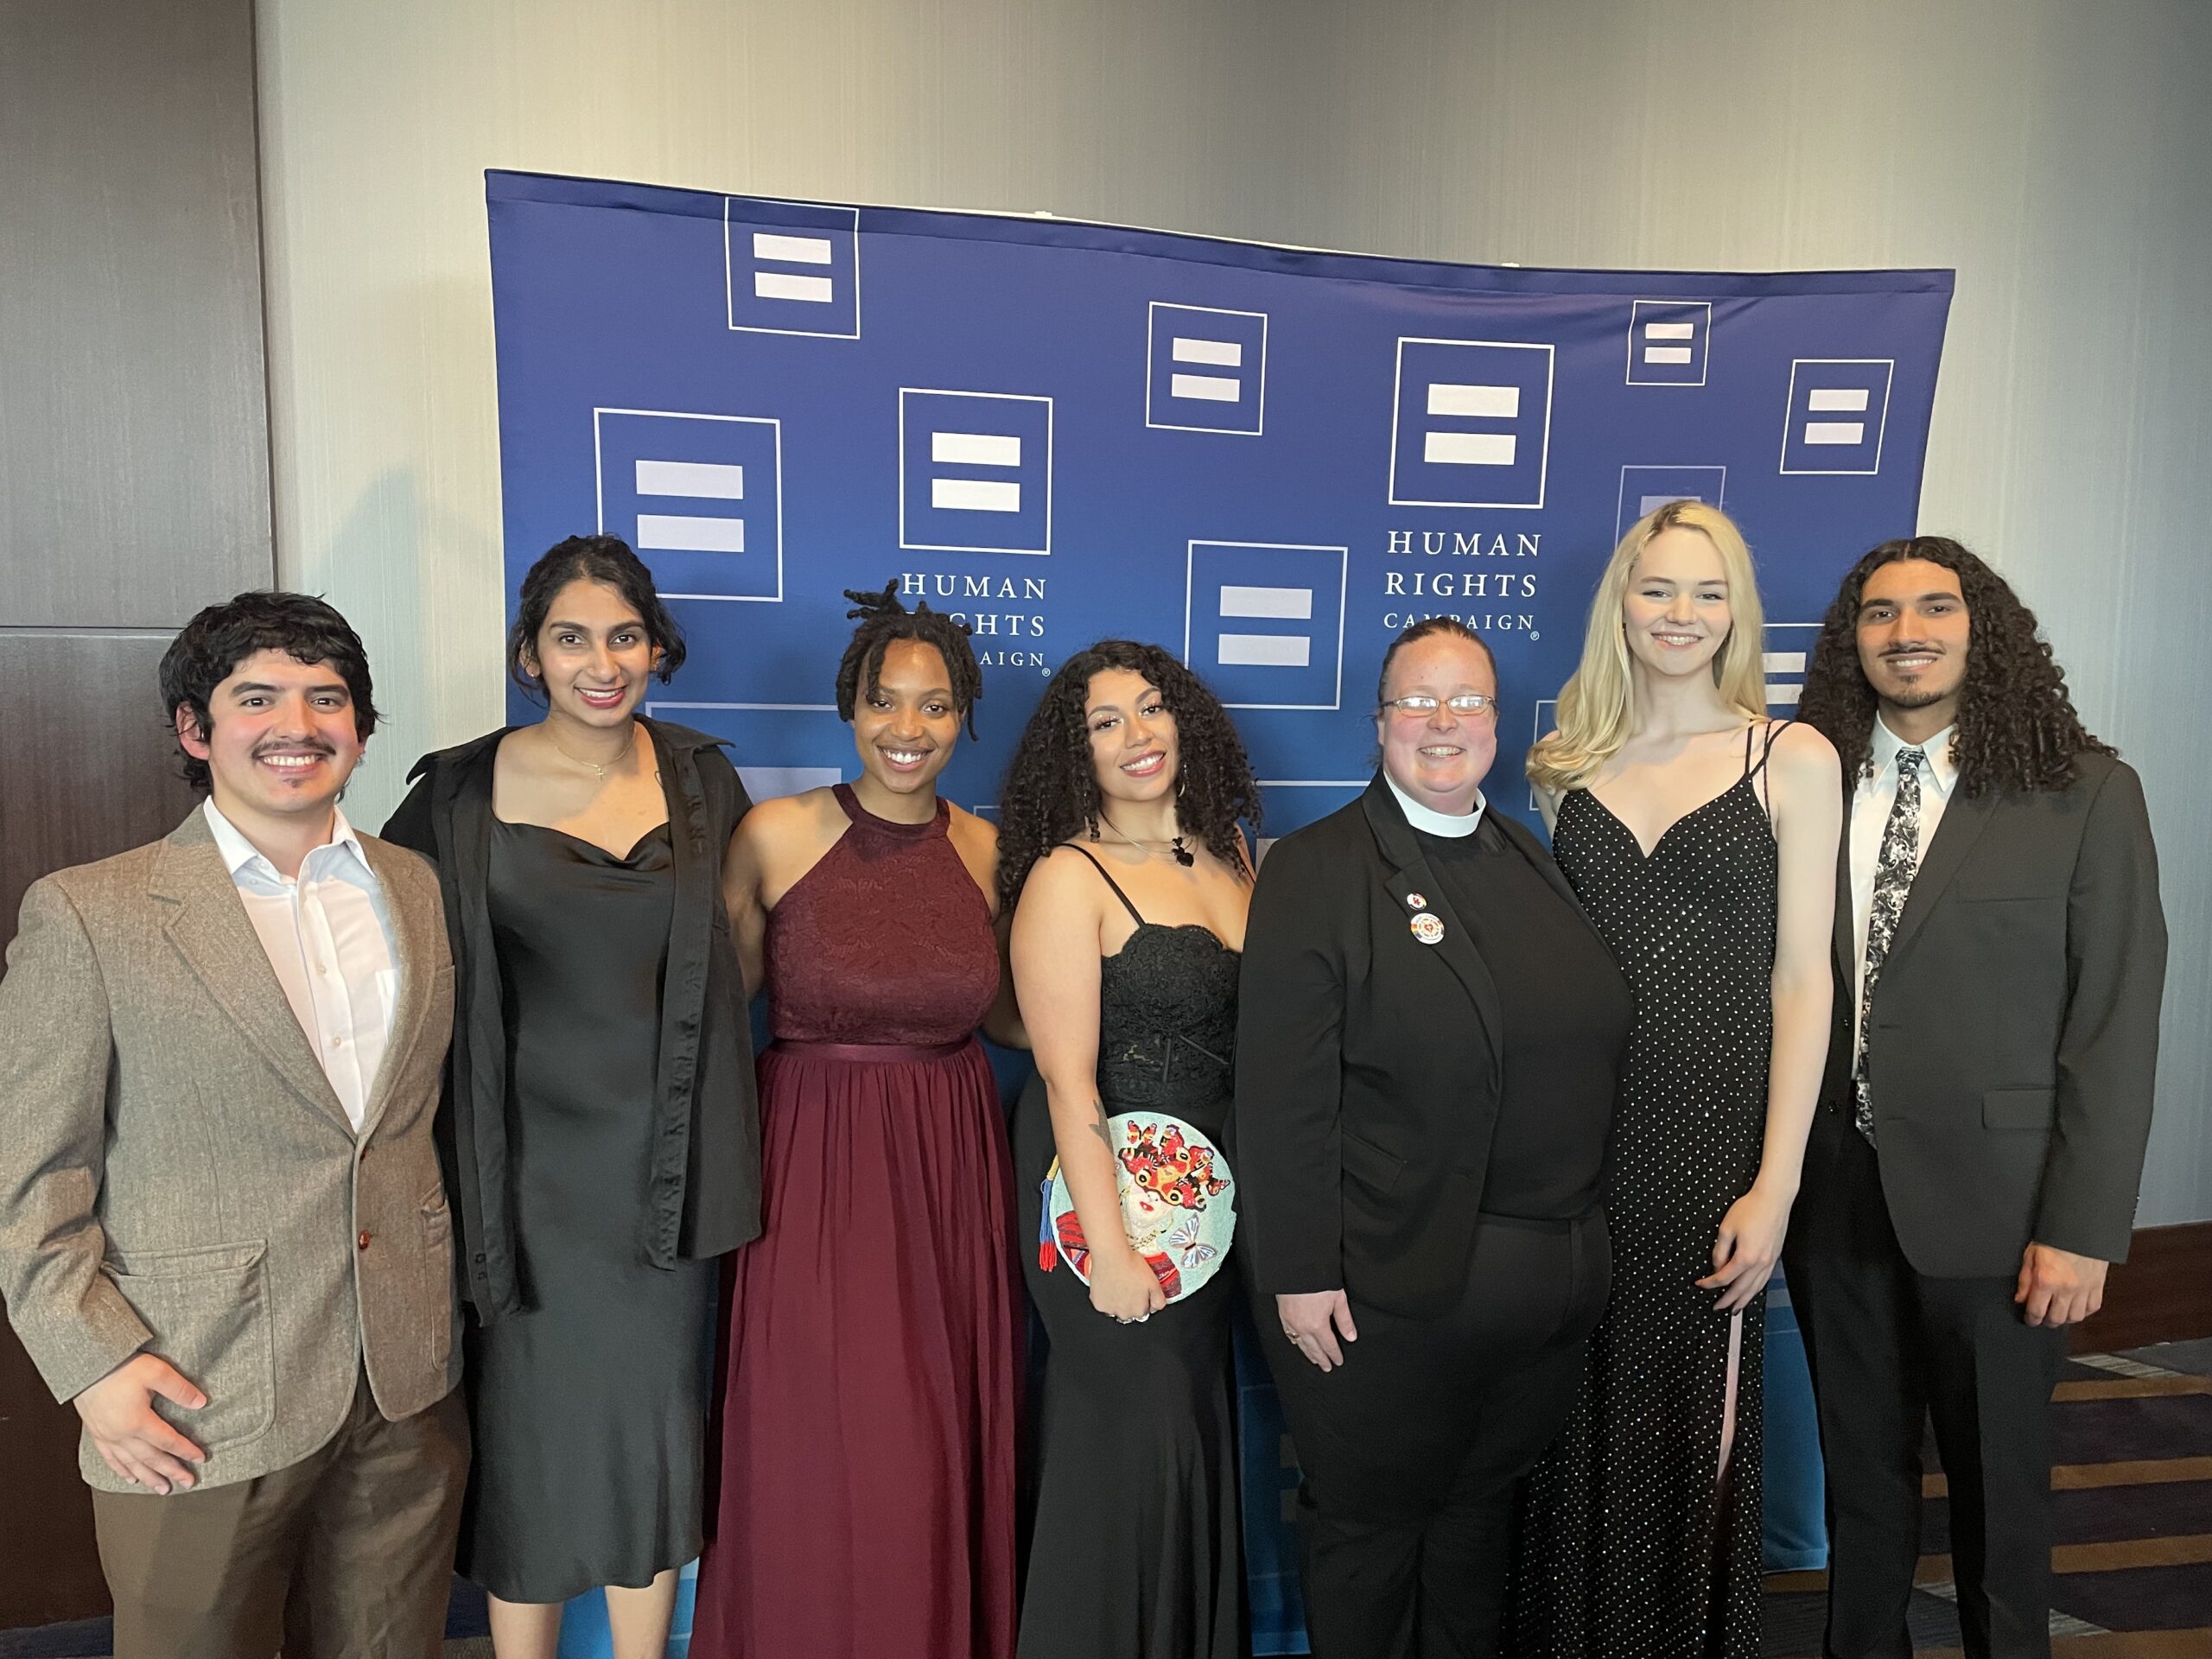 Houston Canterbury Students Attend Human Rights Campaign Gala